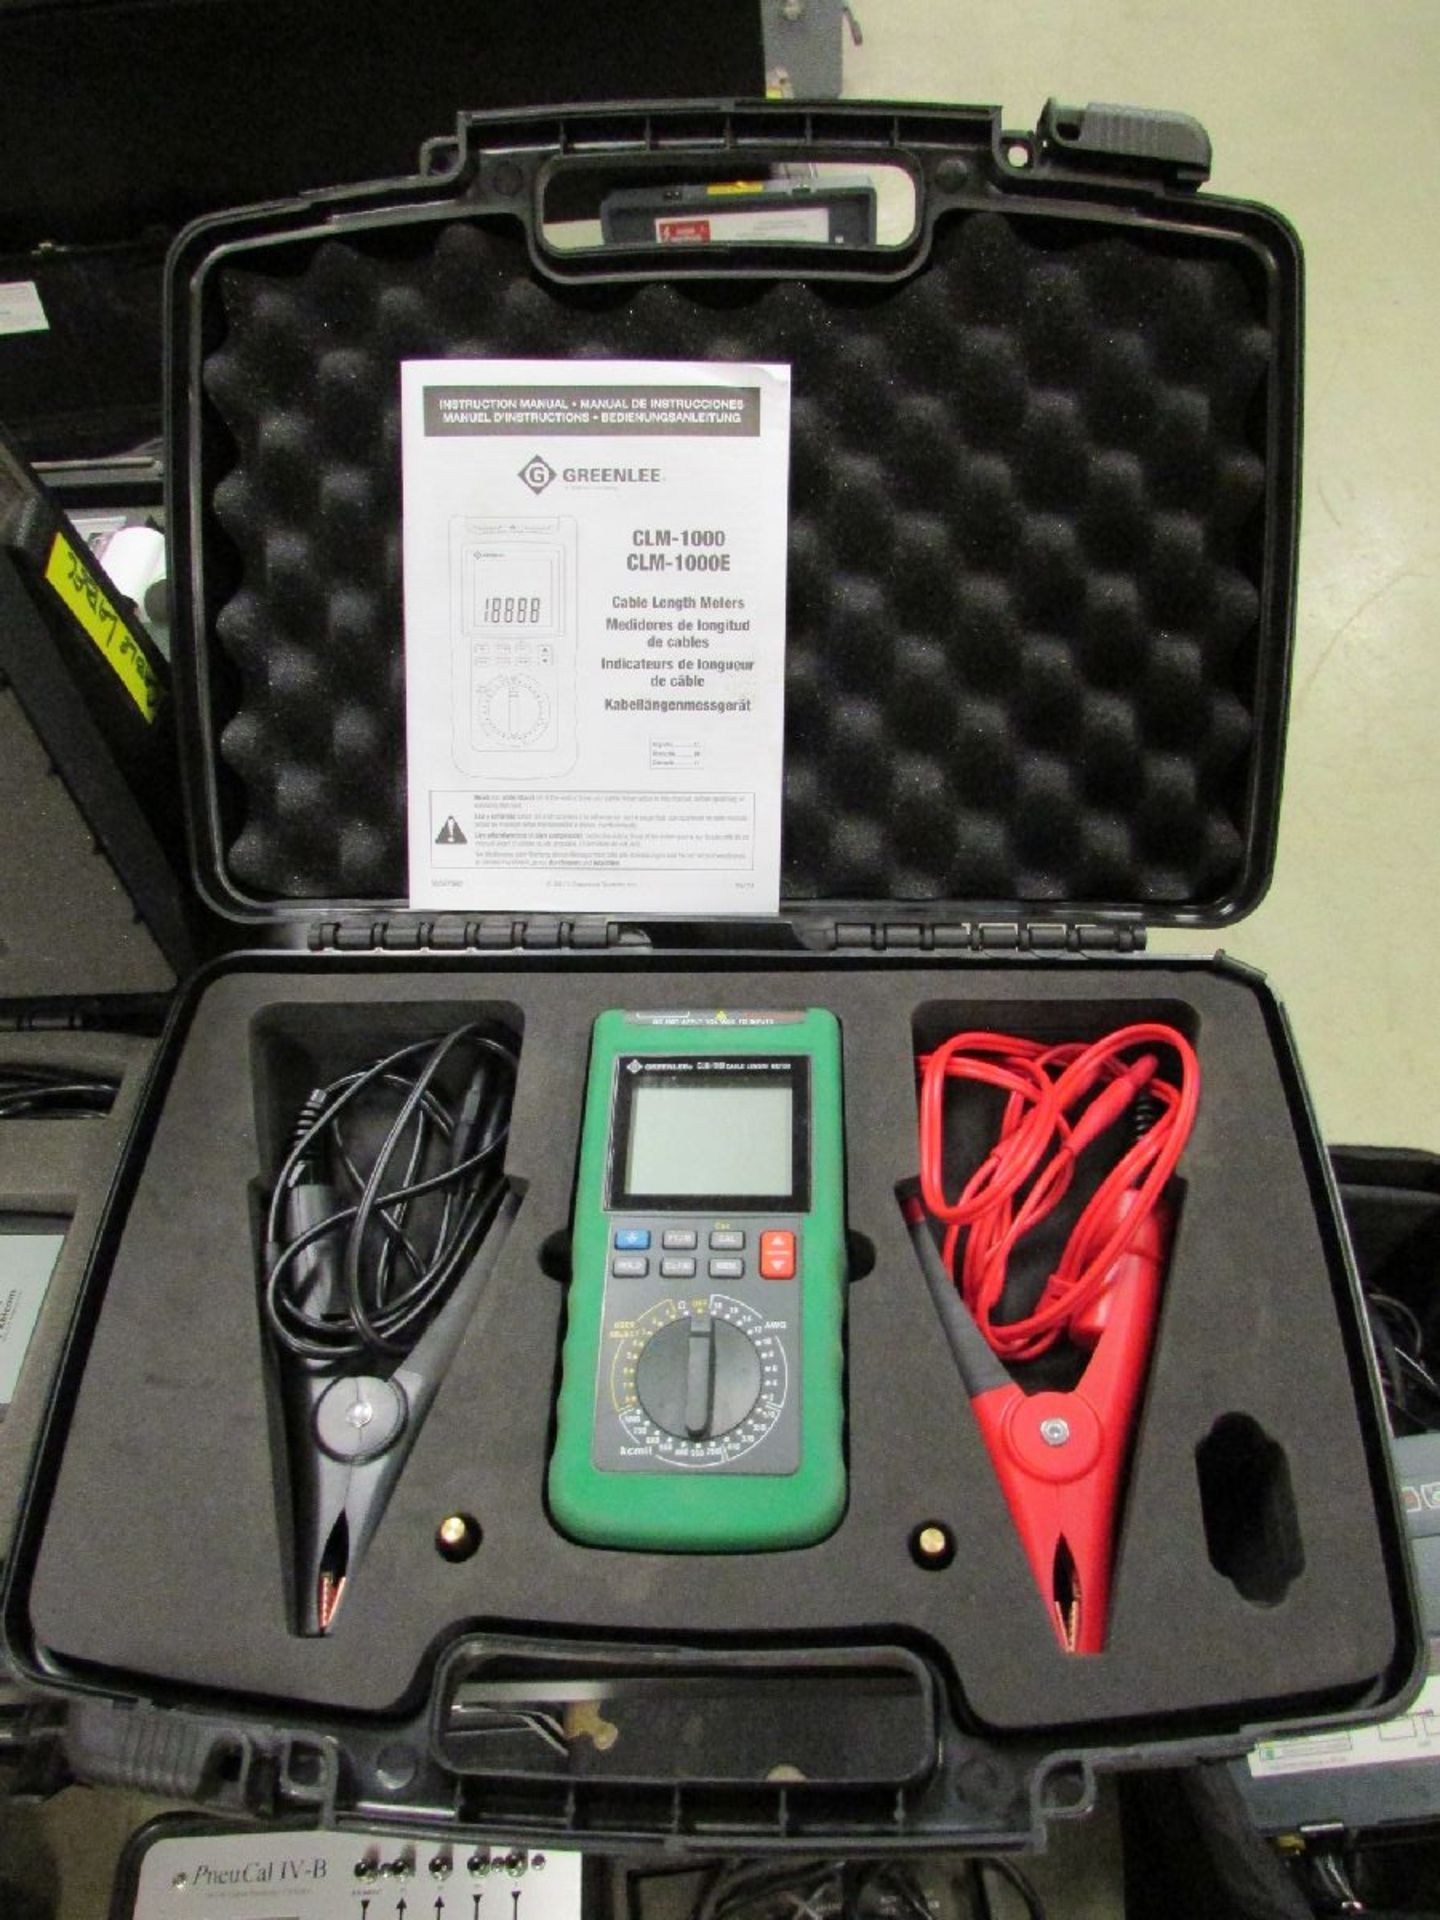 Greenlee Model CLM-1000 Cable Length Meter - Image 3 of 3